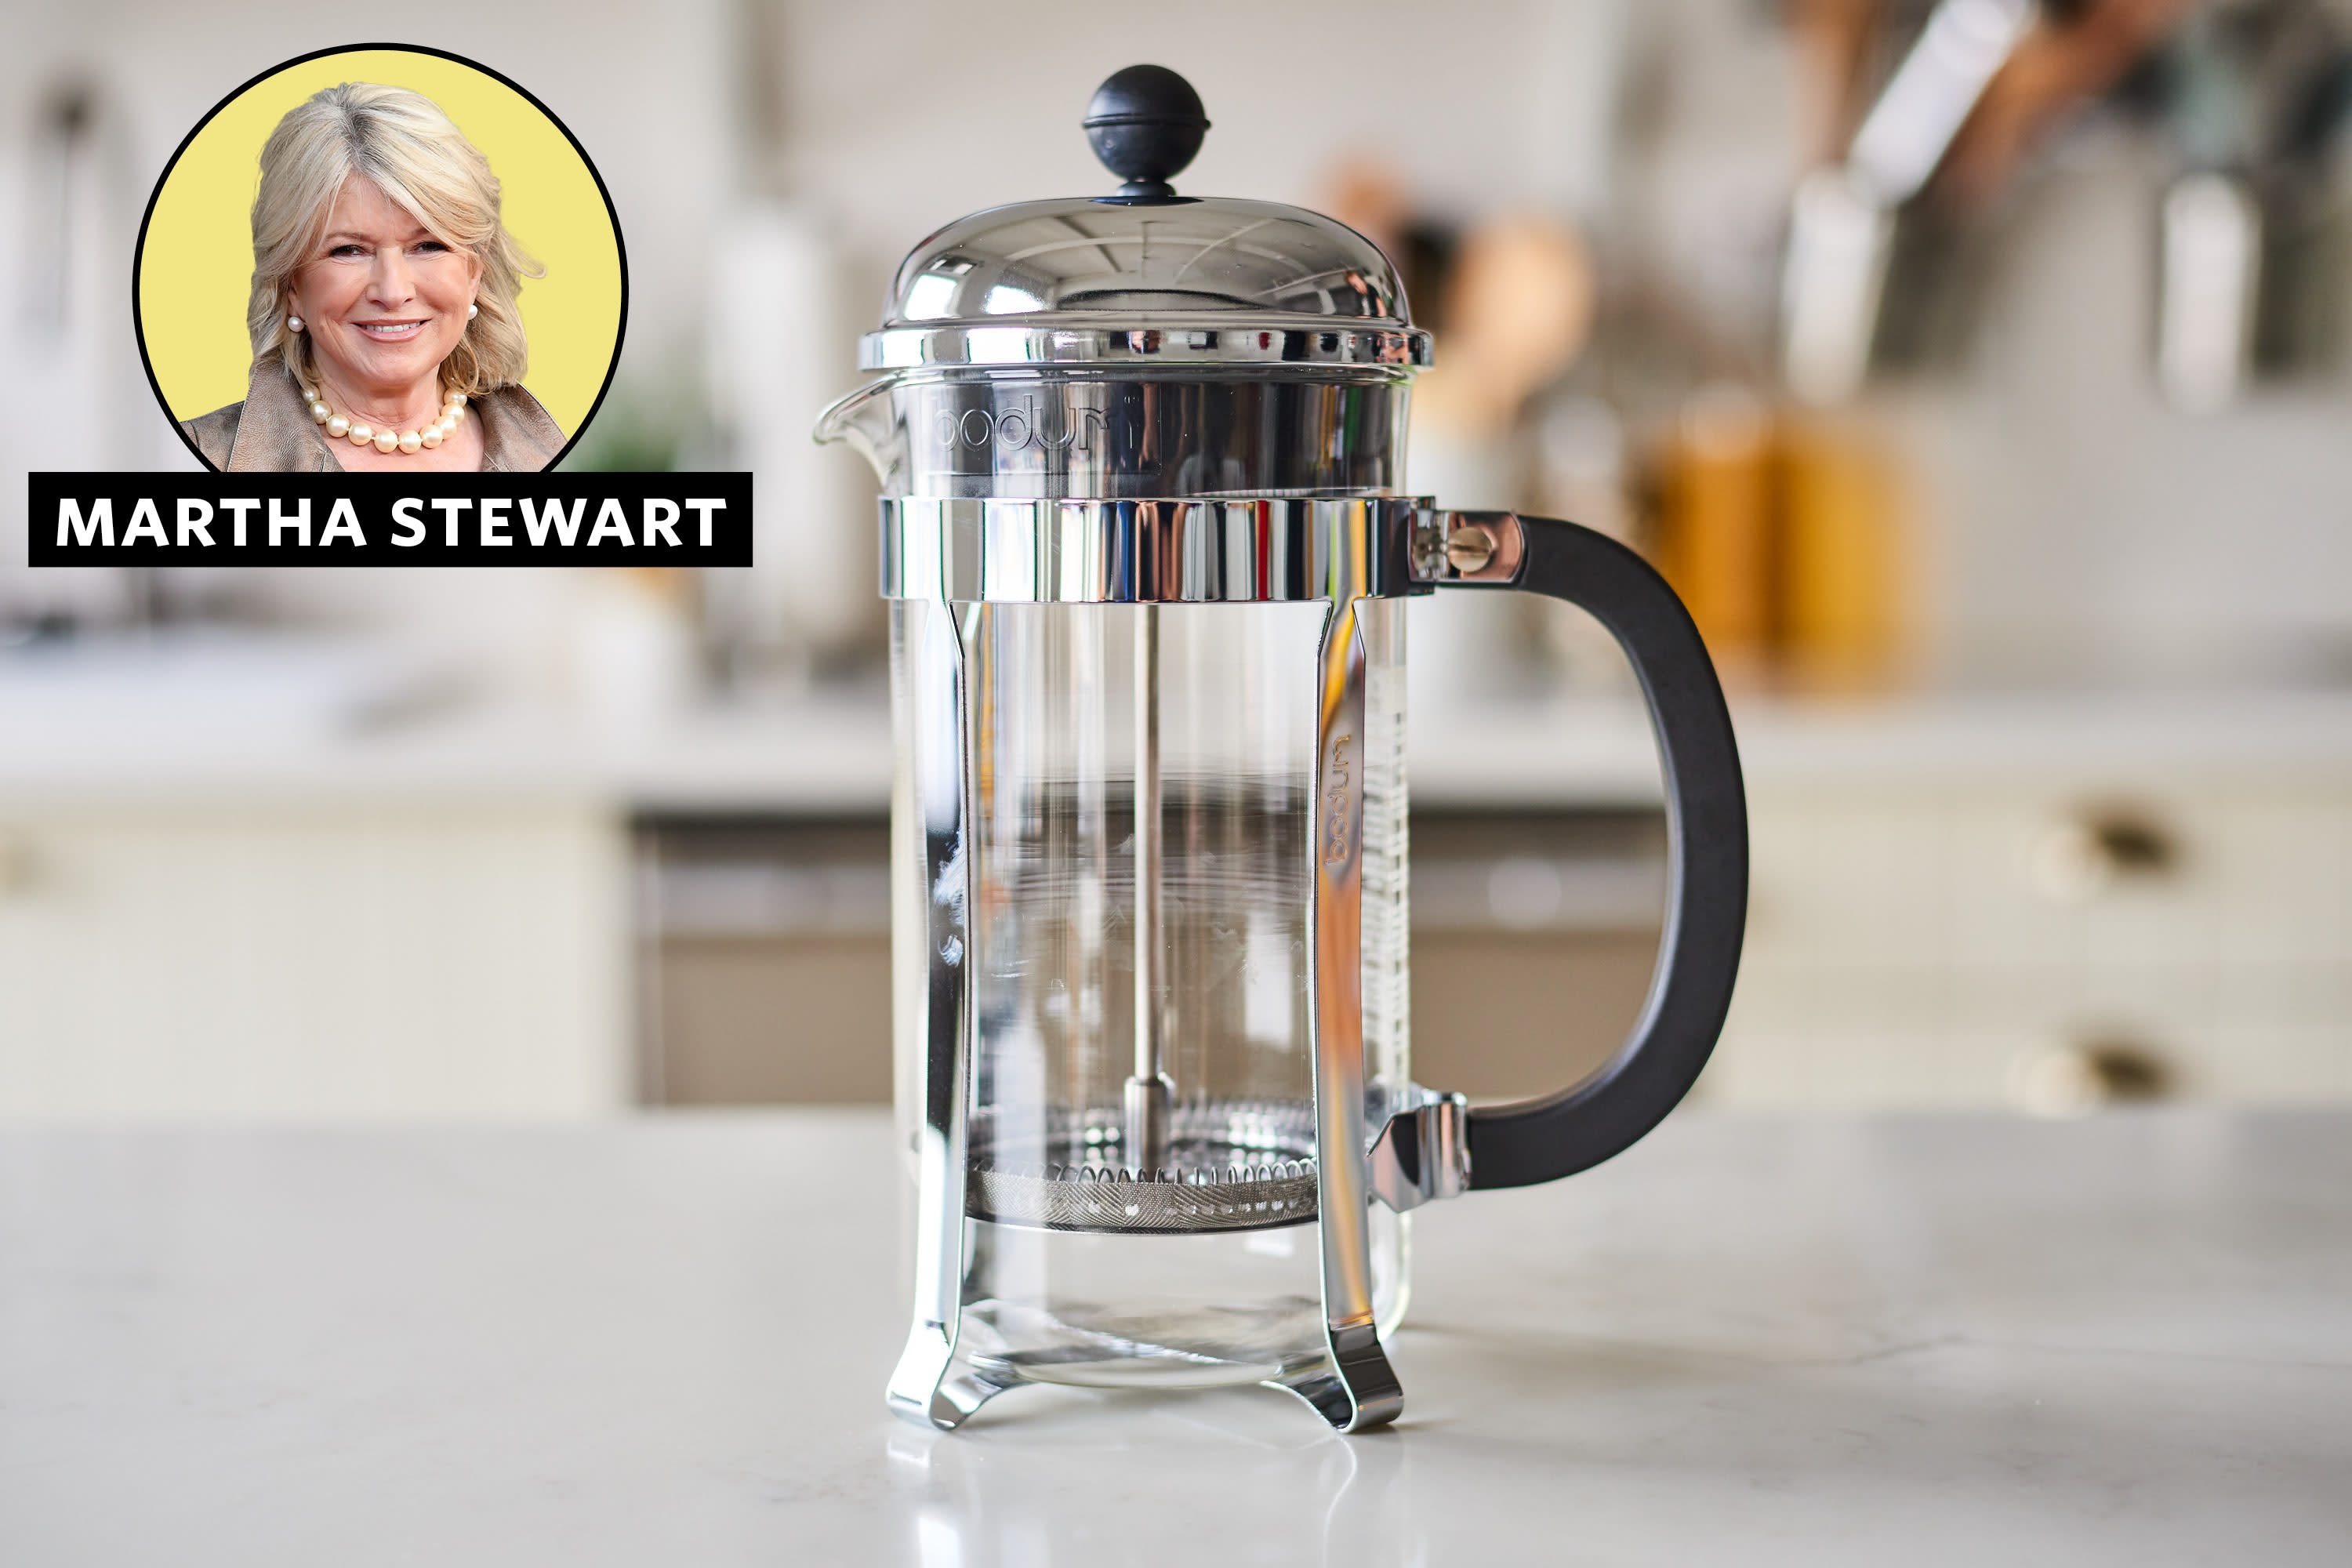 We Tried 4 Celebrity Chefs' Favorite Coffee Gadgets and Here's the